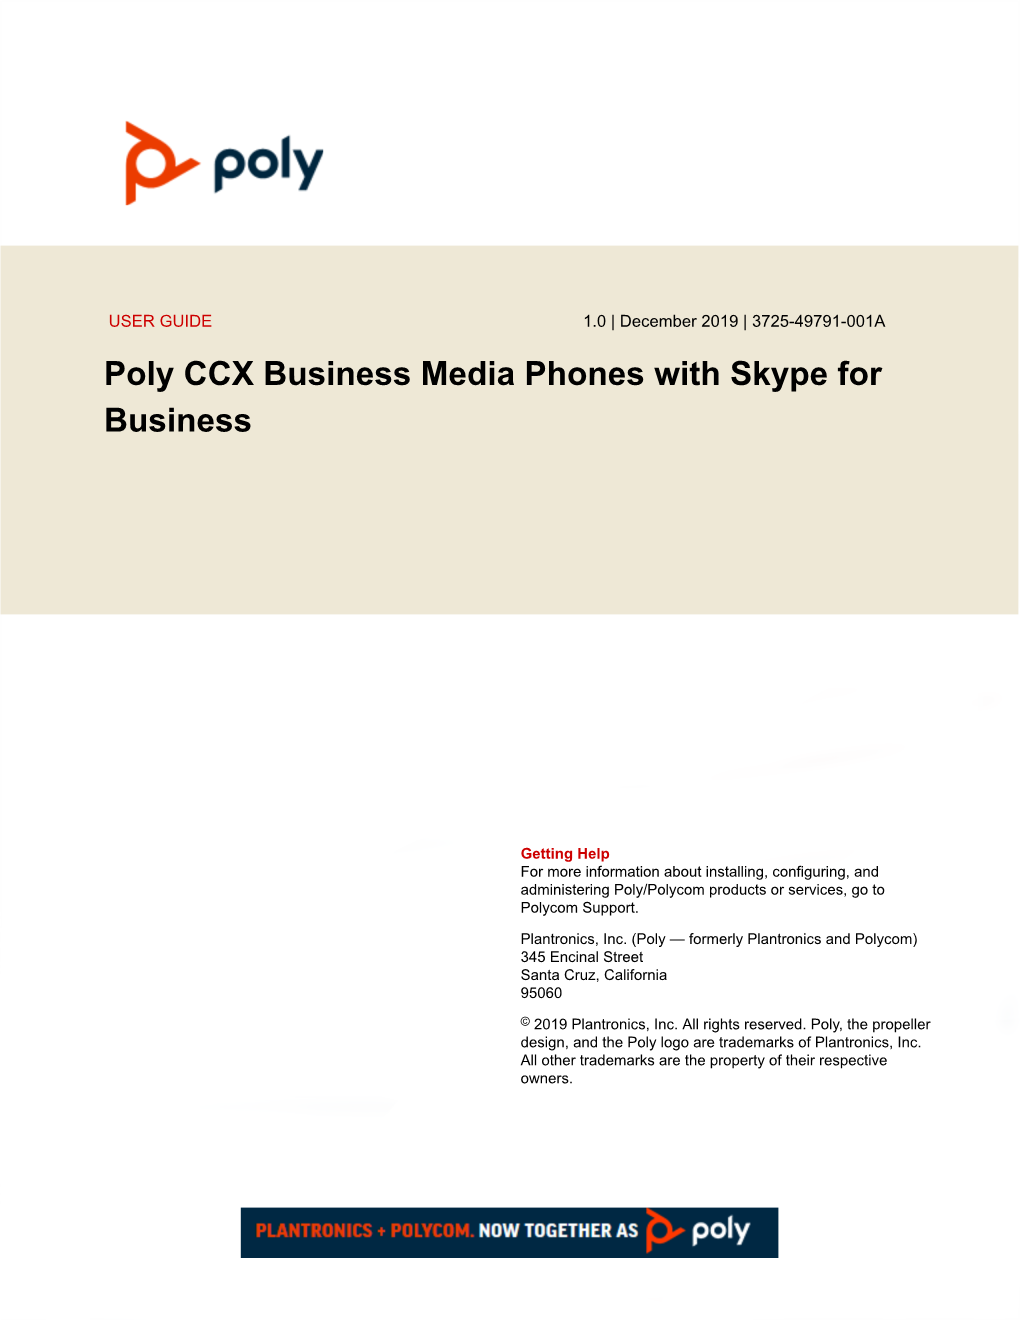 Poly CCX Business Media Phones with Skype for Business